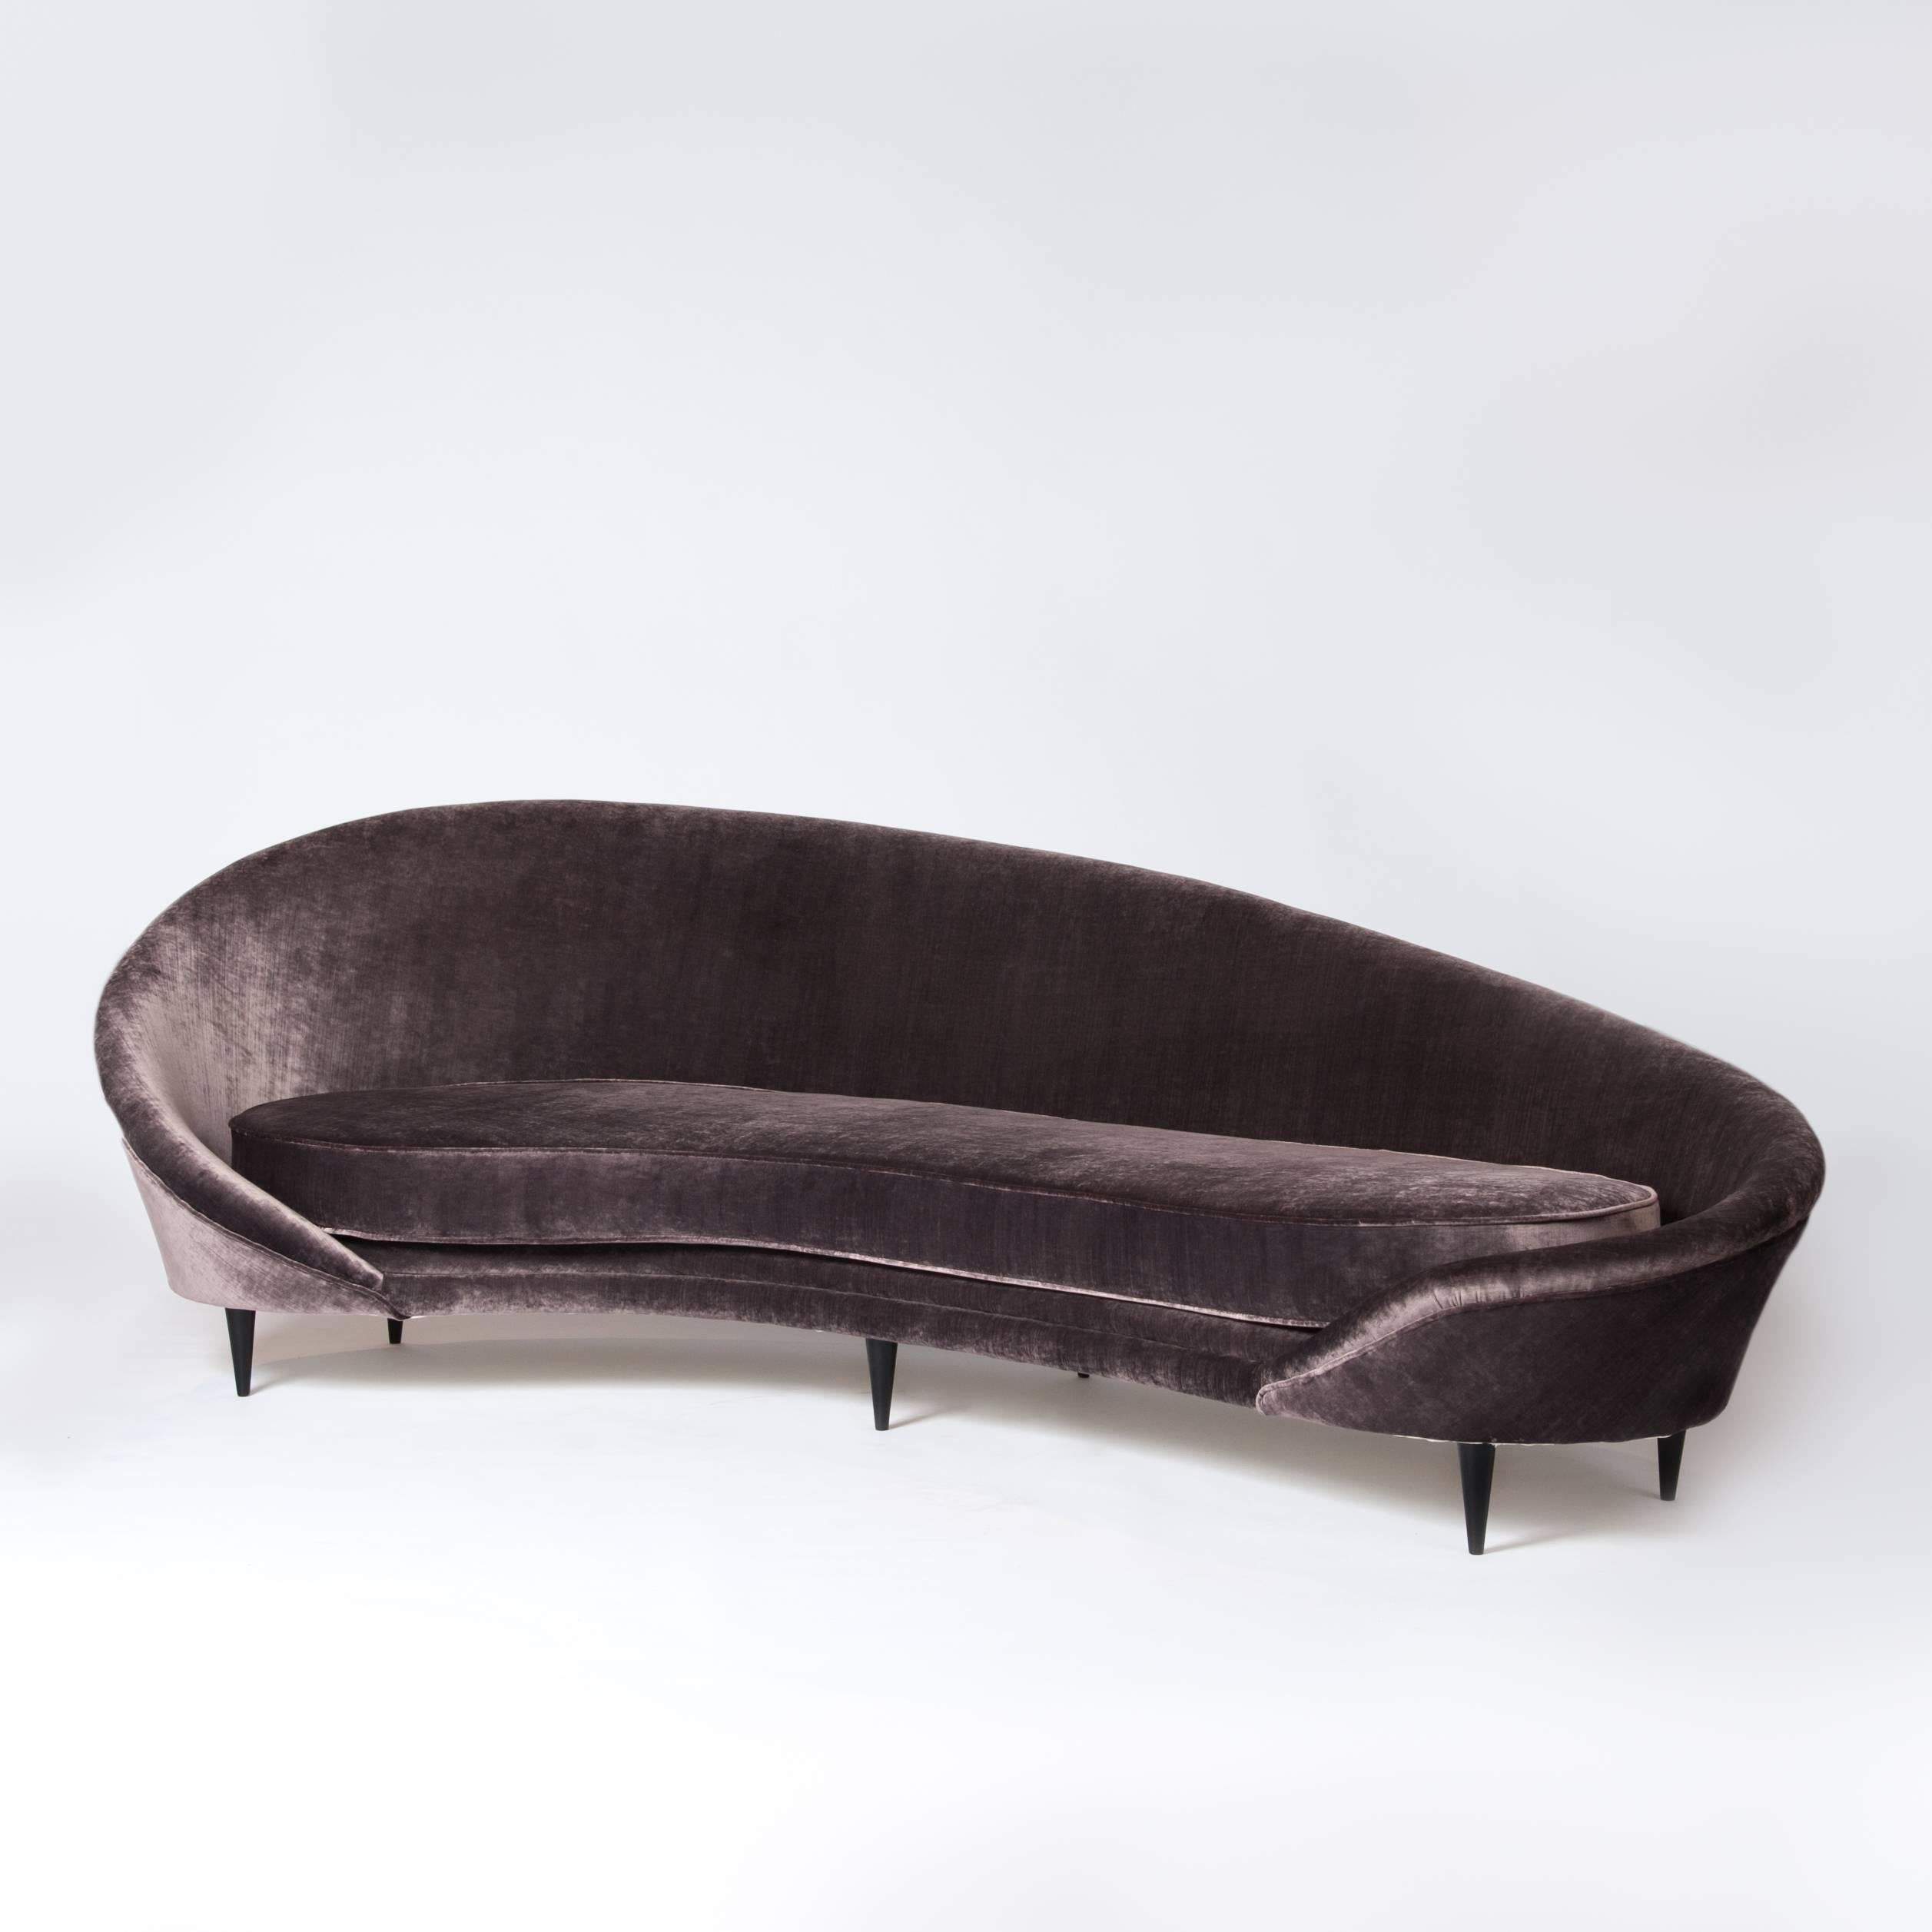 Grande Divano Curvo
Wonderful organic and elegant shaped sofa by Federico Munari.
The object is gently curved; the new upholstery with a cover fabric (viscose velvet color mauve) from Rubelli emphasizes the design.
Please take notice of the seamless